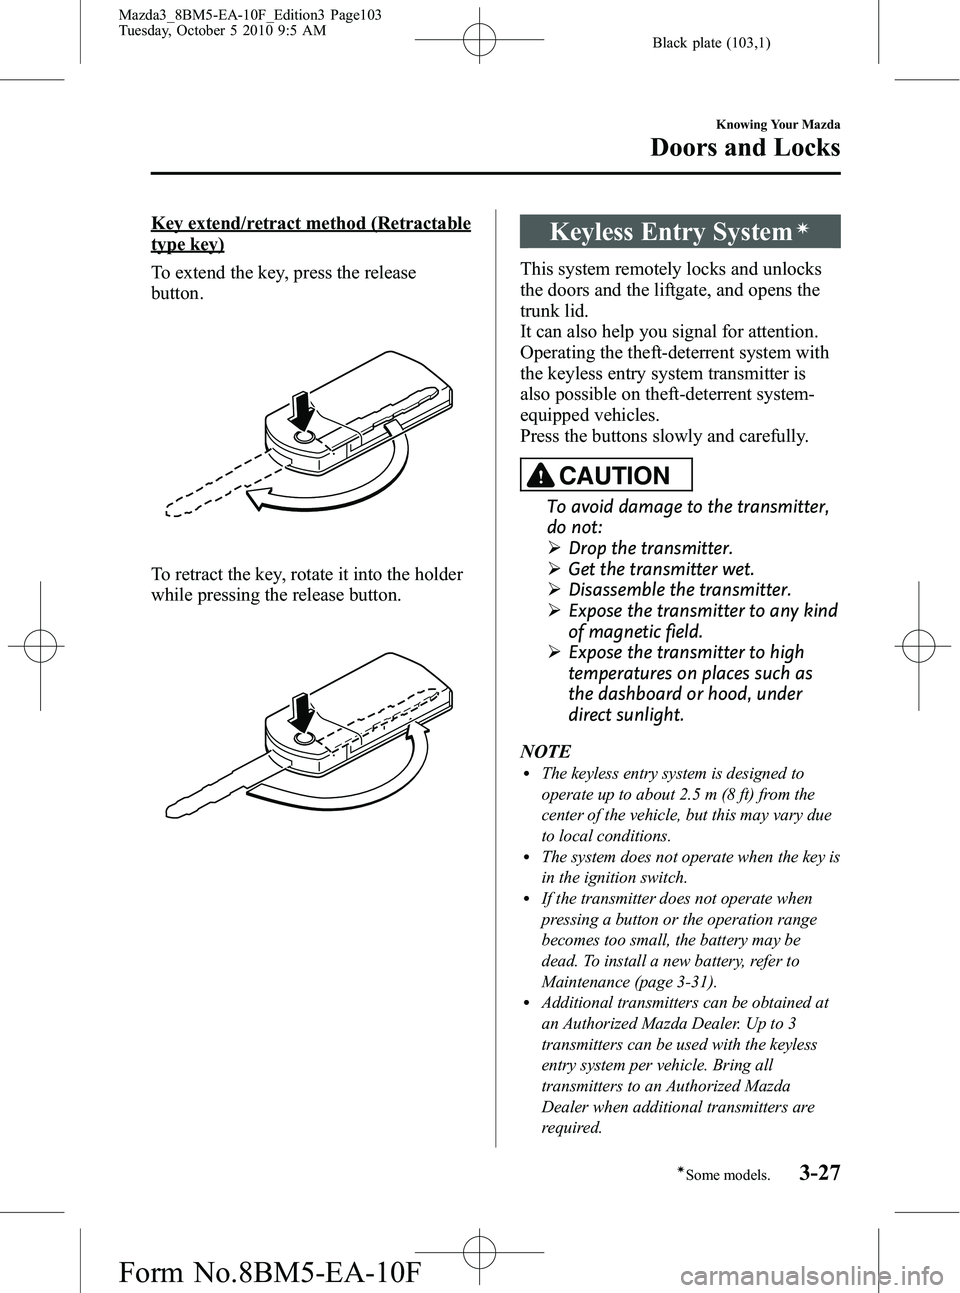 MAZDA MODEL 3 5-DOOR 2011  Owners Manual Black plate (103,1)
Key extend/retract method (Retractable
type key)
To extend the key, press the release
button.
To retract the key, rotate it into the holder
while pressing the release button.
Keyle